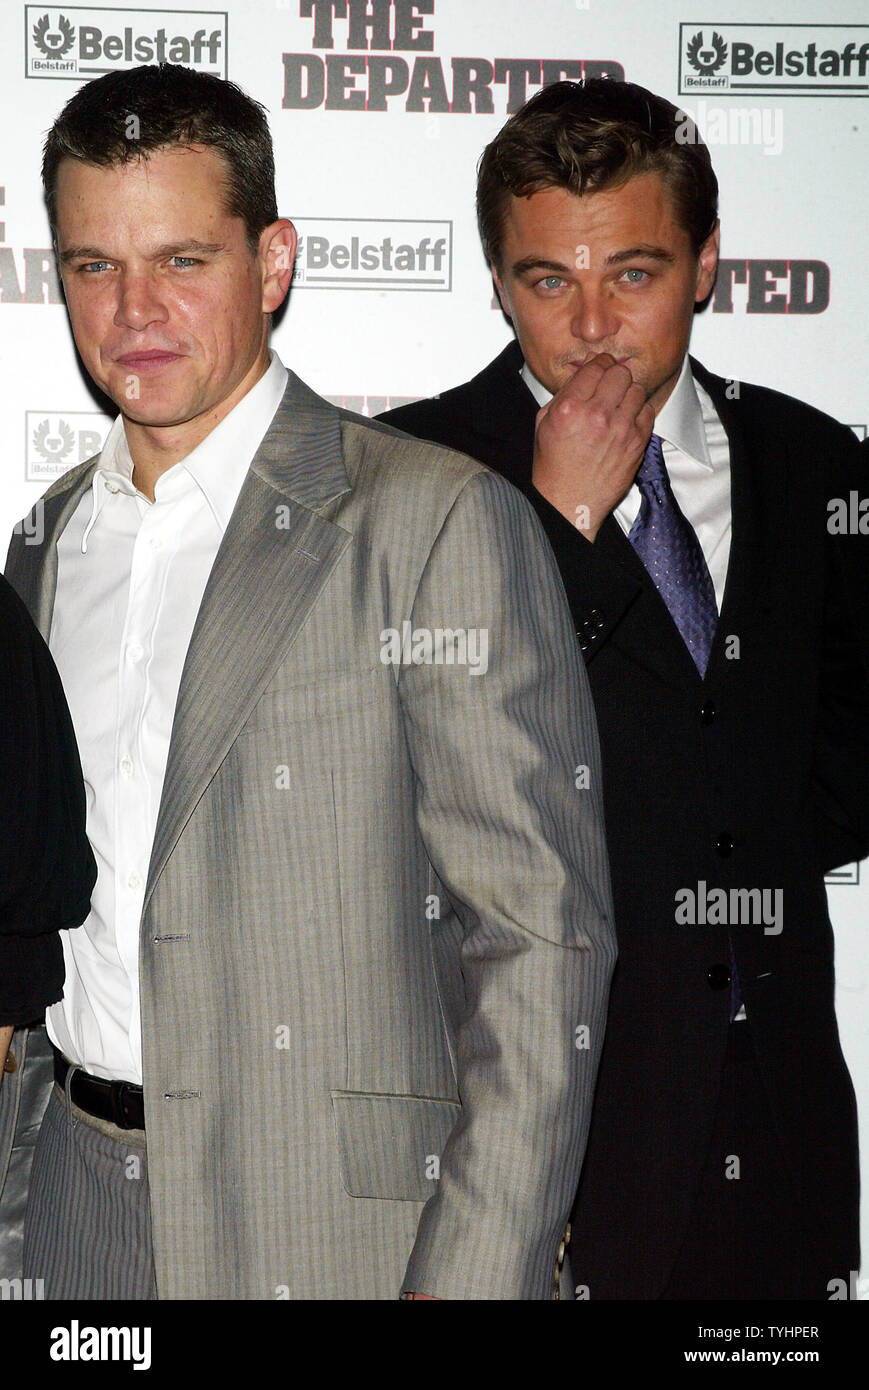 Matt Damon (left) and Leonardo DiCaprio arrive for the premiere of their  new movie "The Departed" at the Ziegfeld Theater in New York on September  26, 2006. (UPI Photo/Laura Cavanaugh Stock Photo -